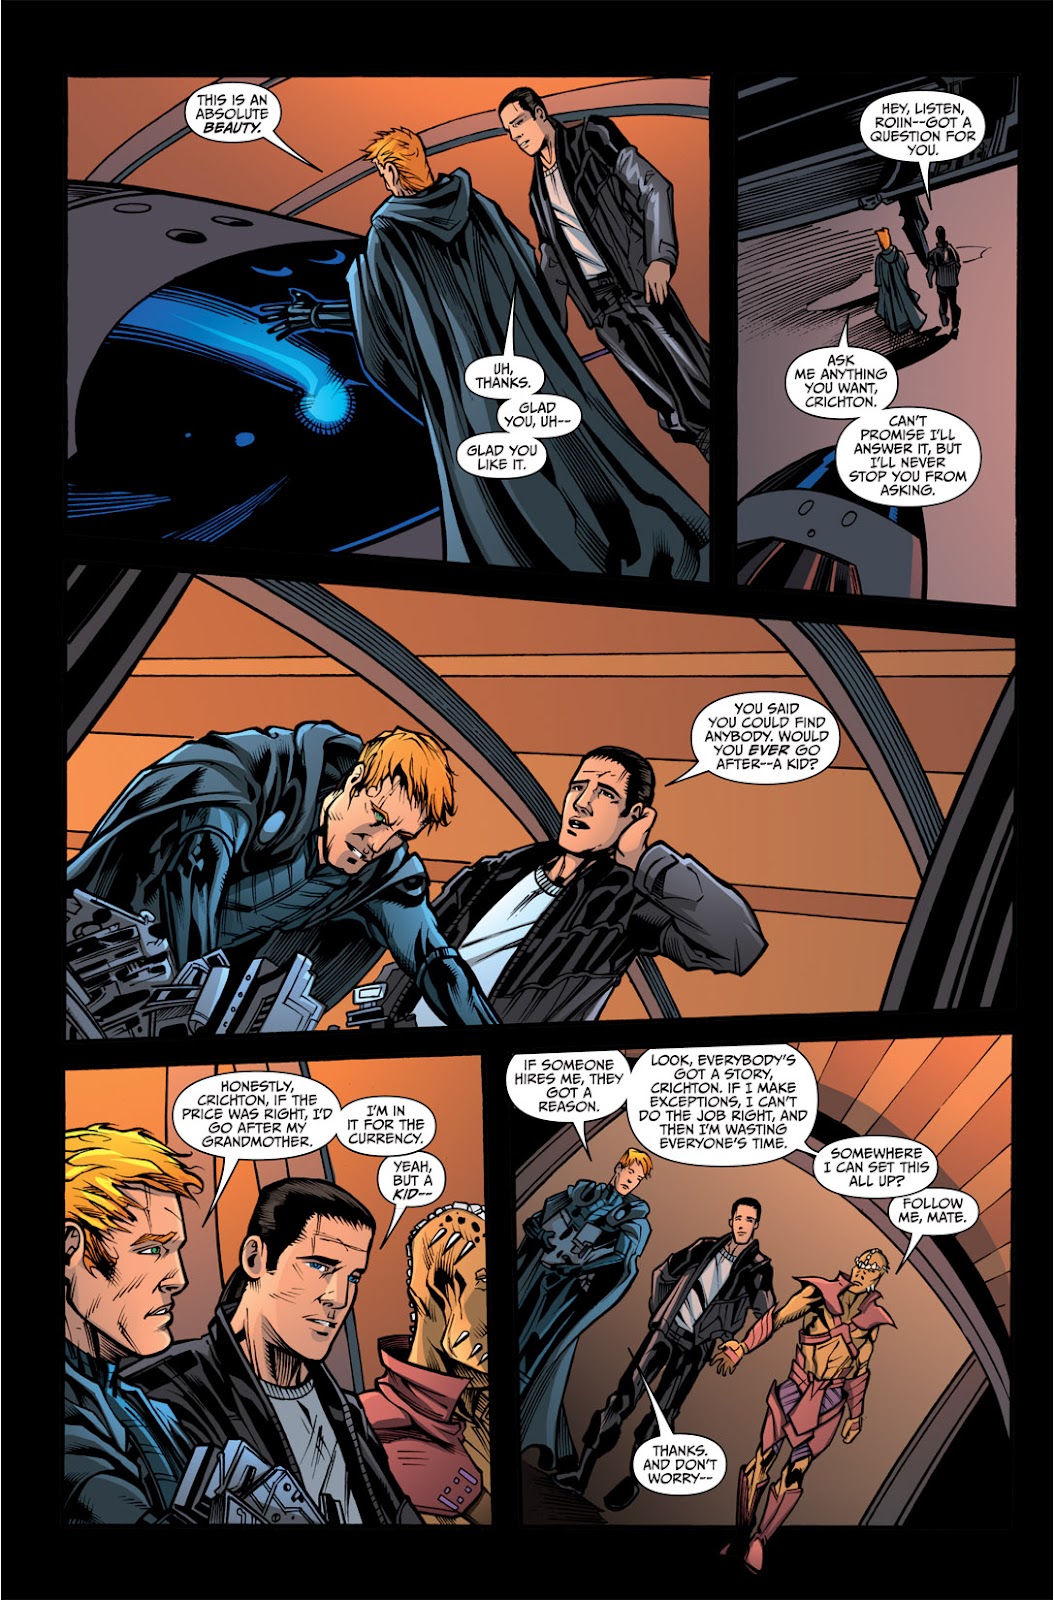 Farscape: Gone and Back issue 3 - Page 9